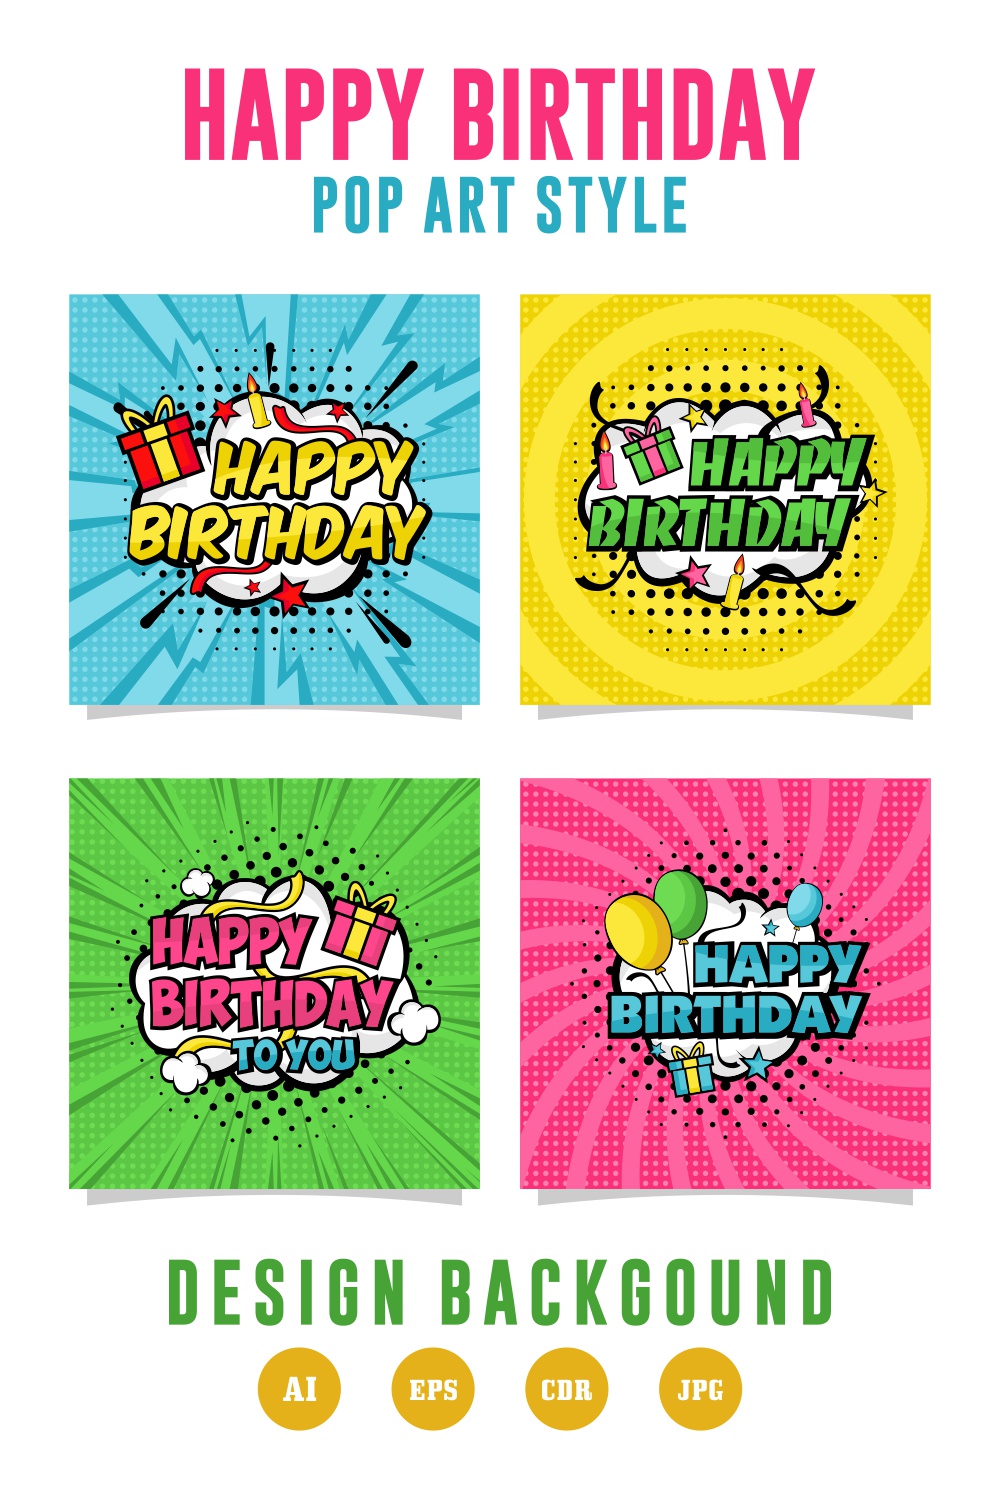 Happy birthday Pop art style collection - $5 pinterest preview image.